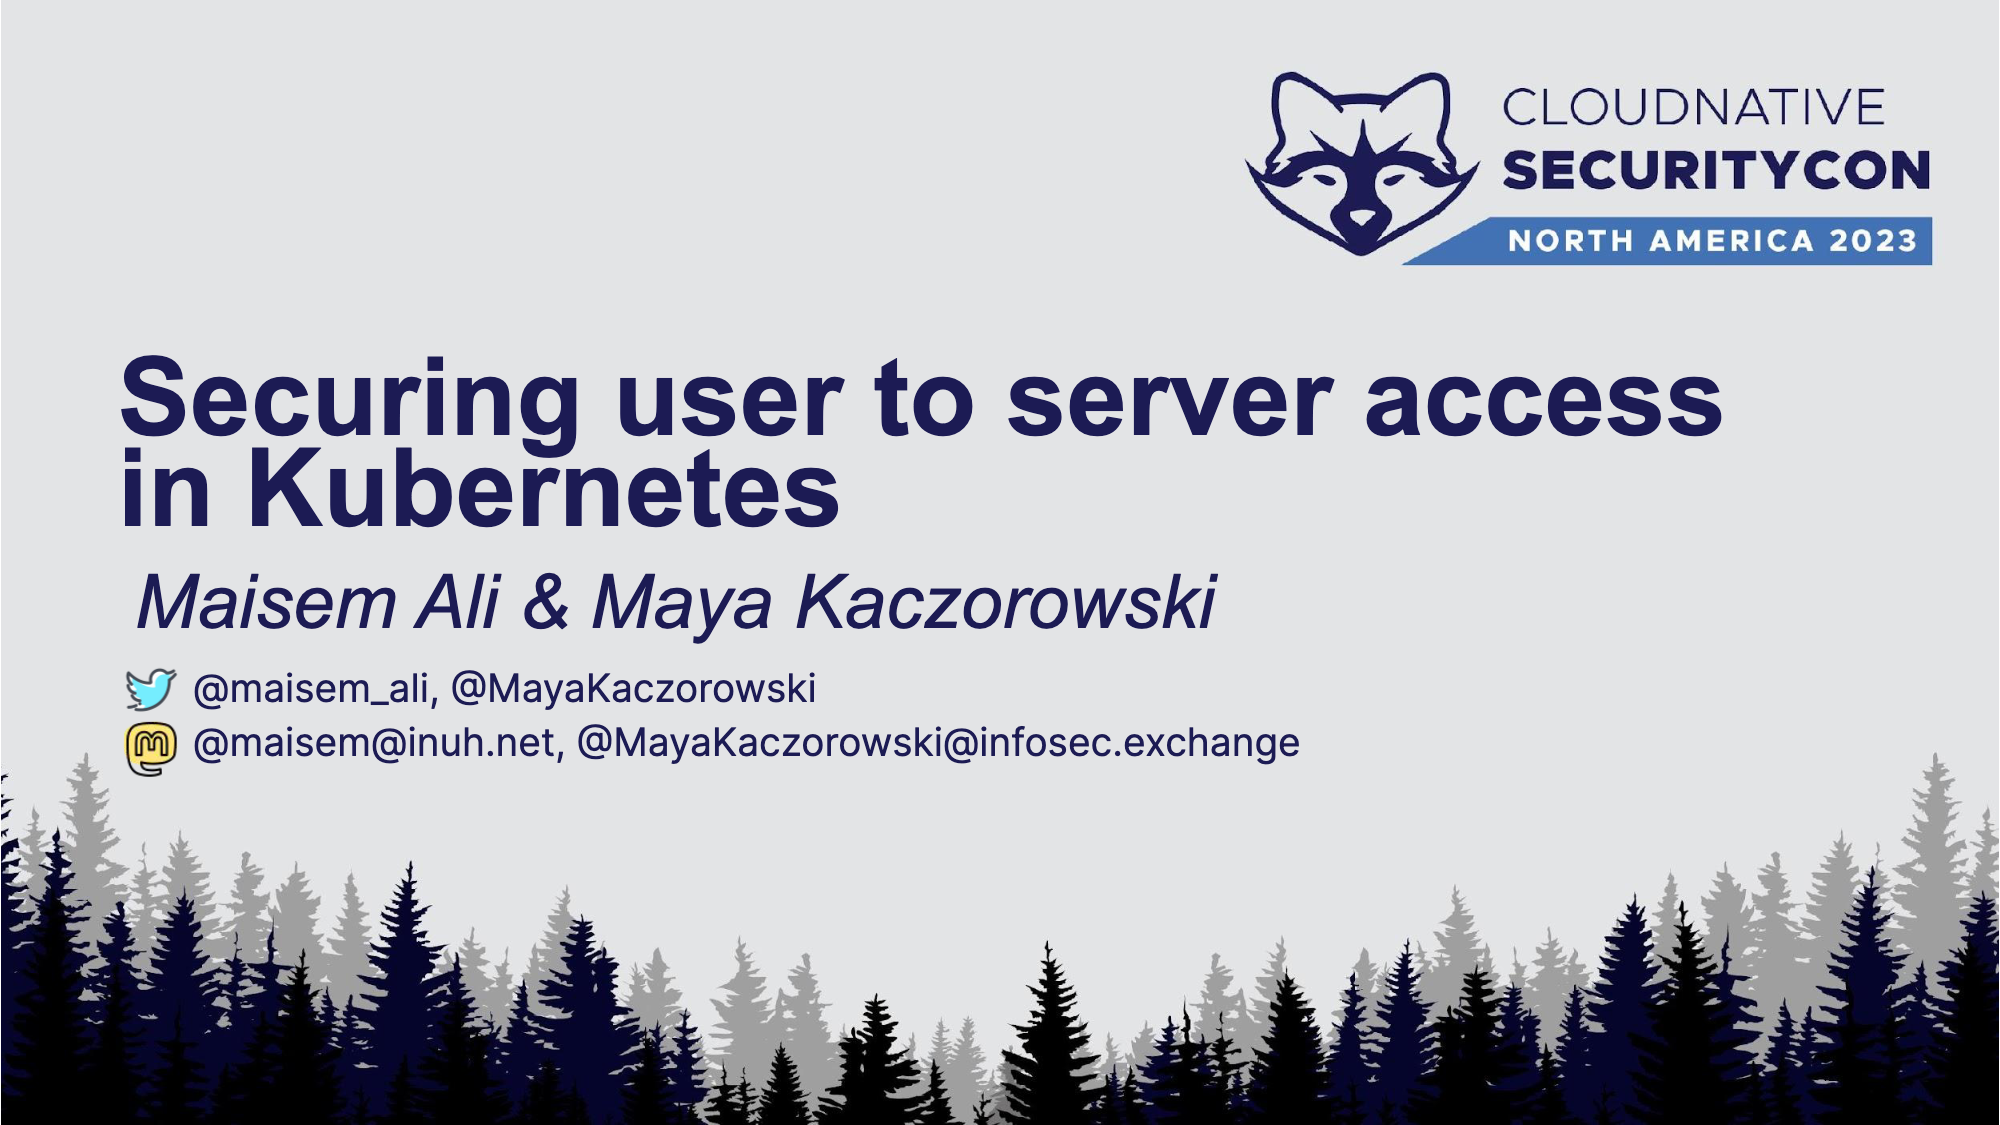 CloudNativeSecurityCon NA 2023 | Securing user to server access in Kubernetes with Maisem Ali